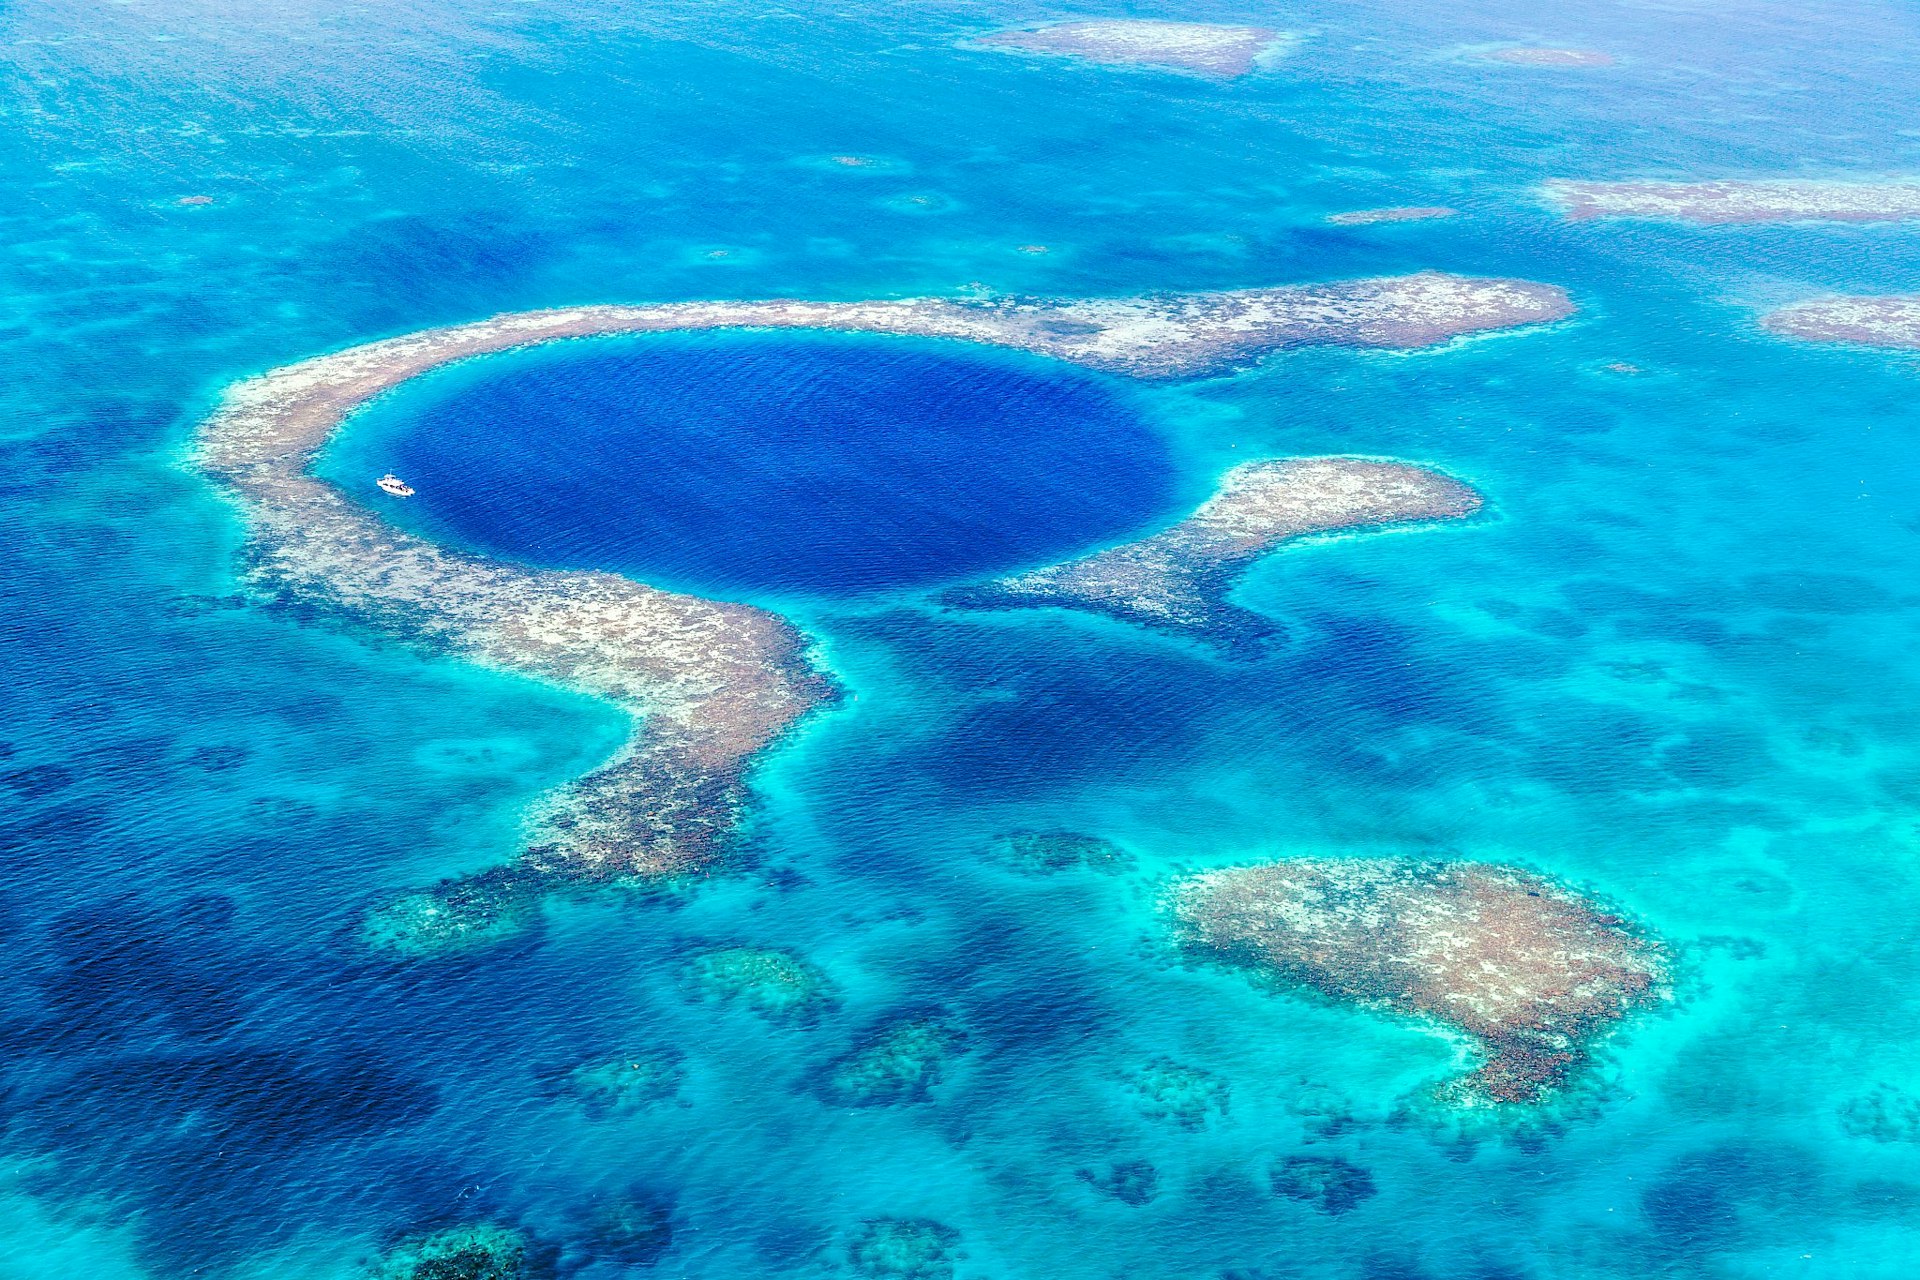 Aerial view over Belize's Great Blue Hole, a giant blue marine sinkhole encircled by an atoll, surrounded by paler turquoise waters.